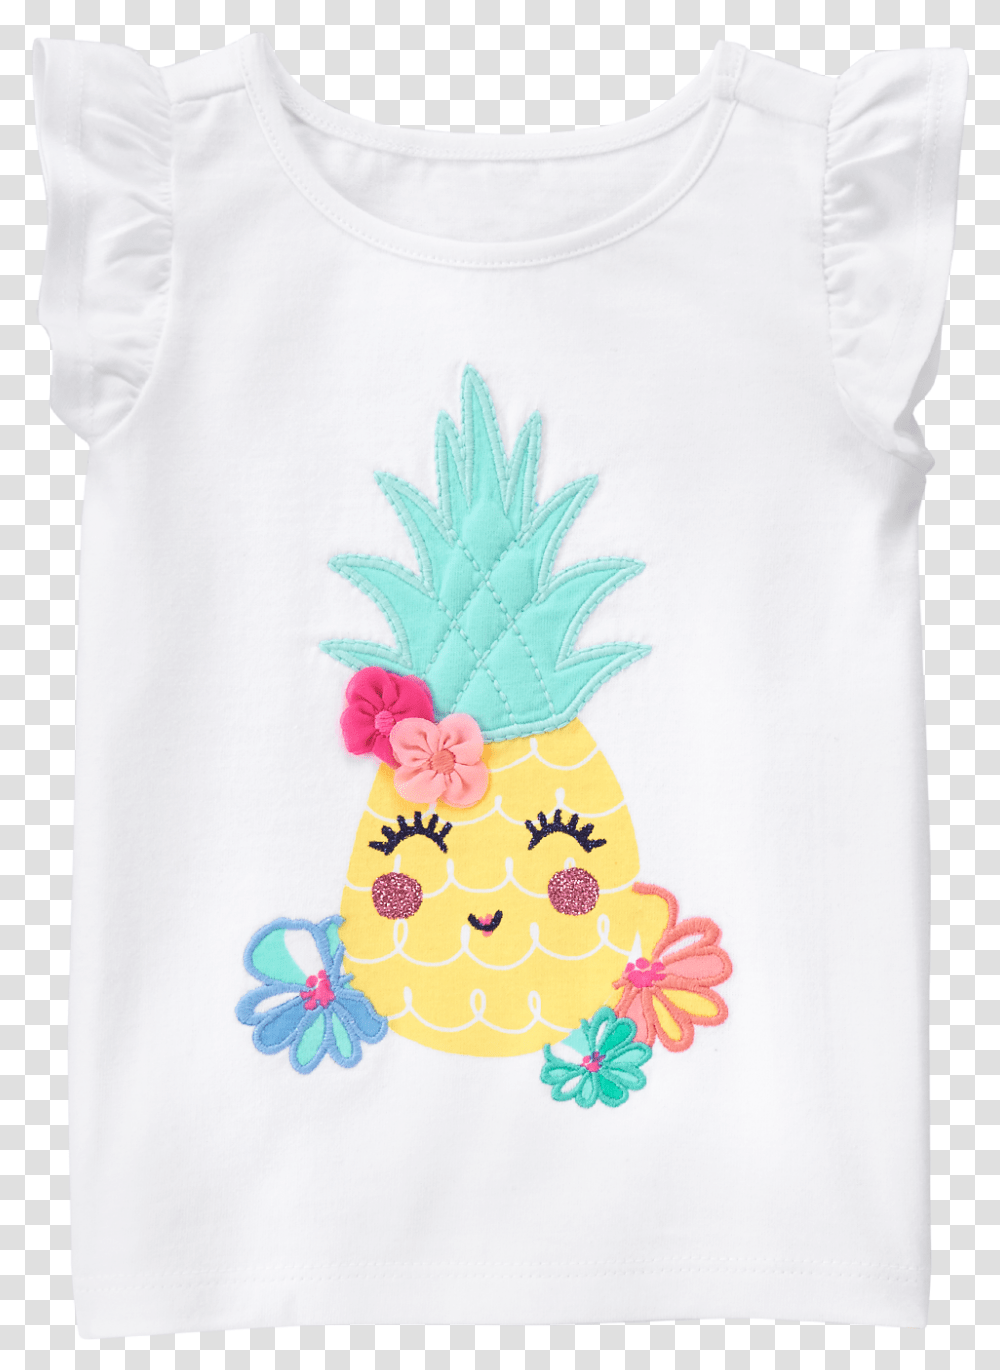 Download Hd Pineapple Tee Pineapple Image Pineapple, Clothing, Apparel, Pillow, Cushion Transparent Png